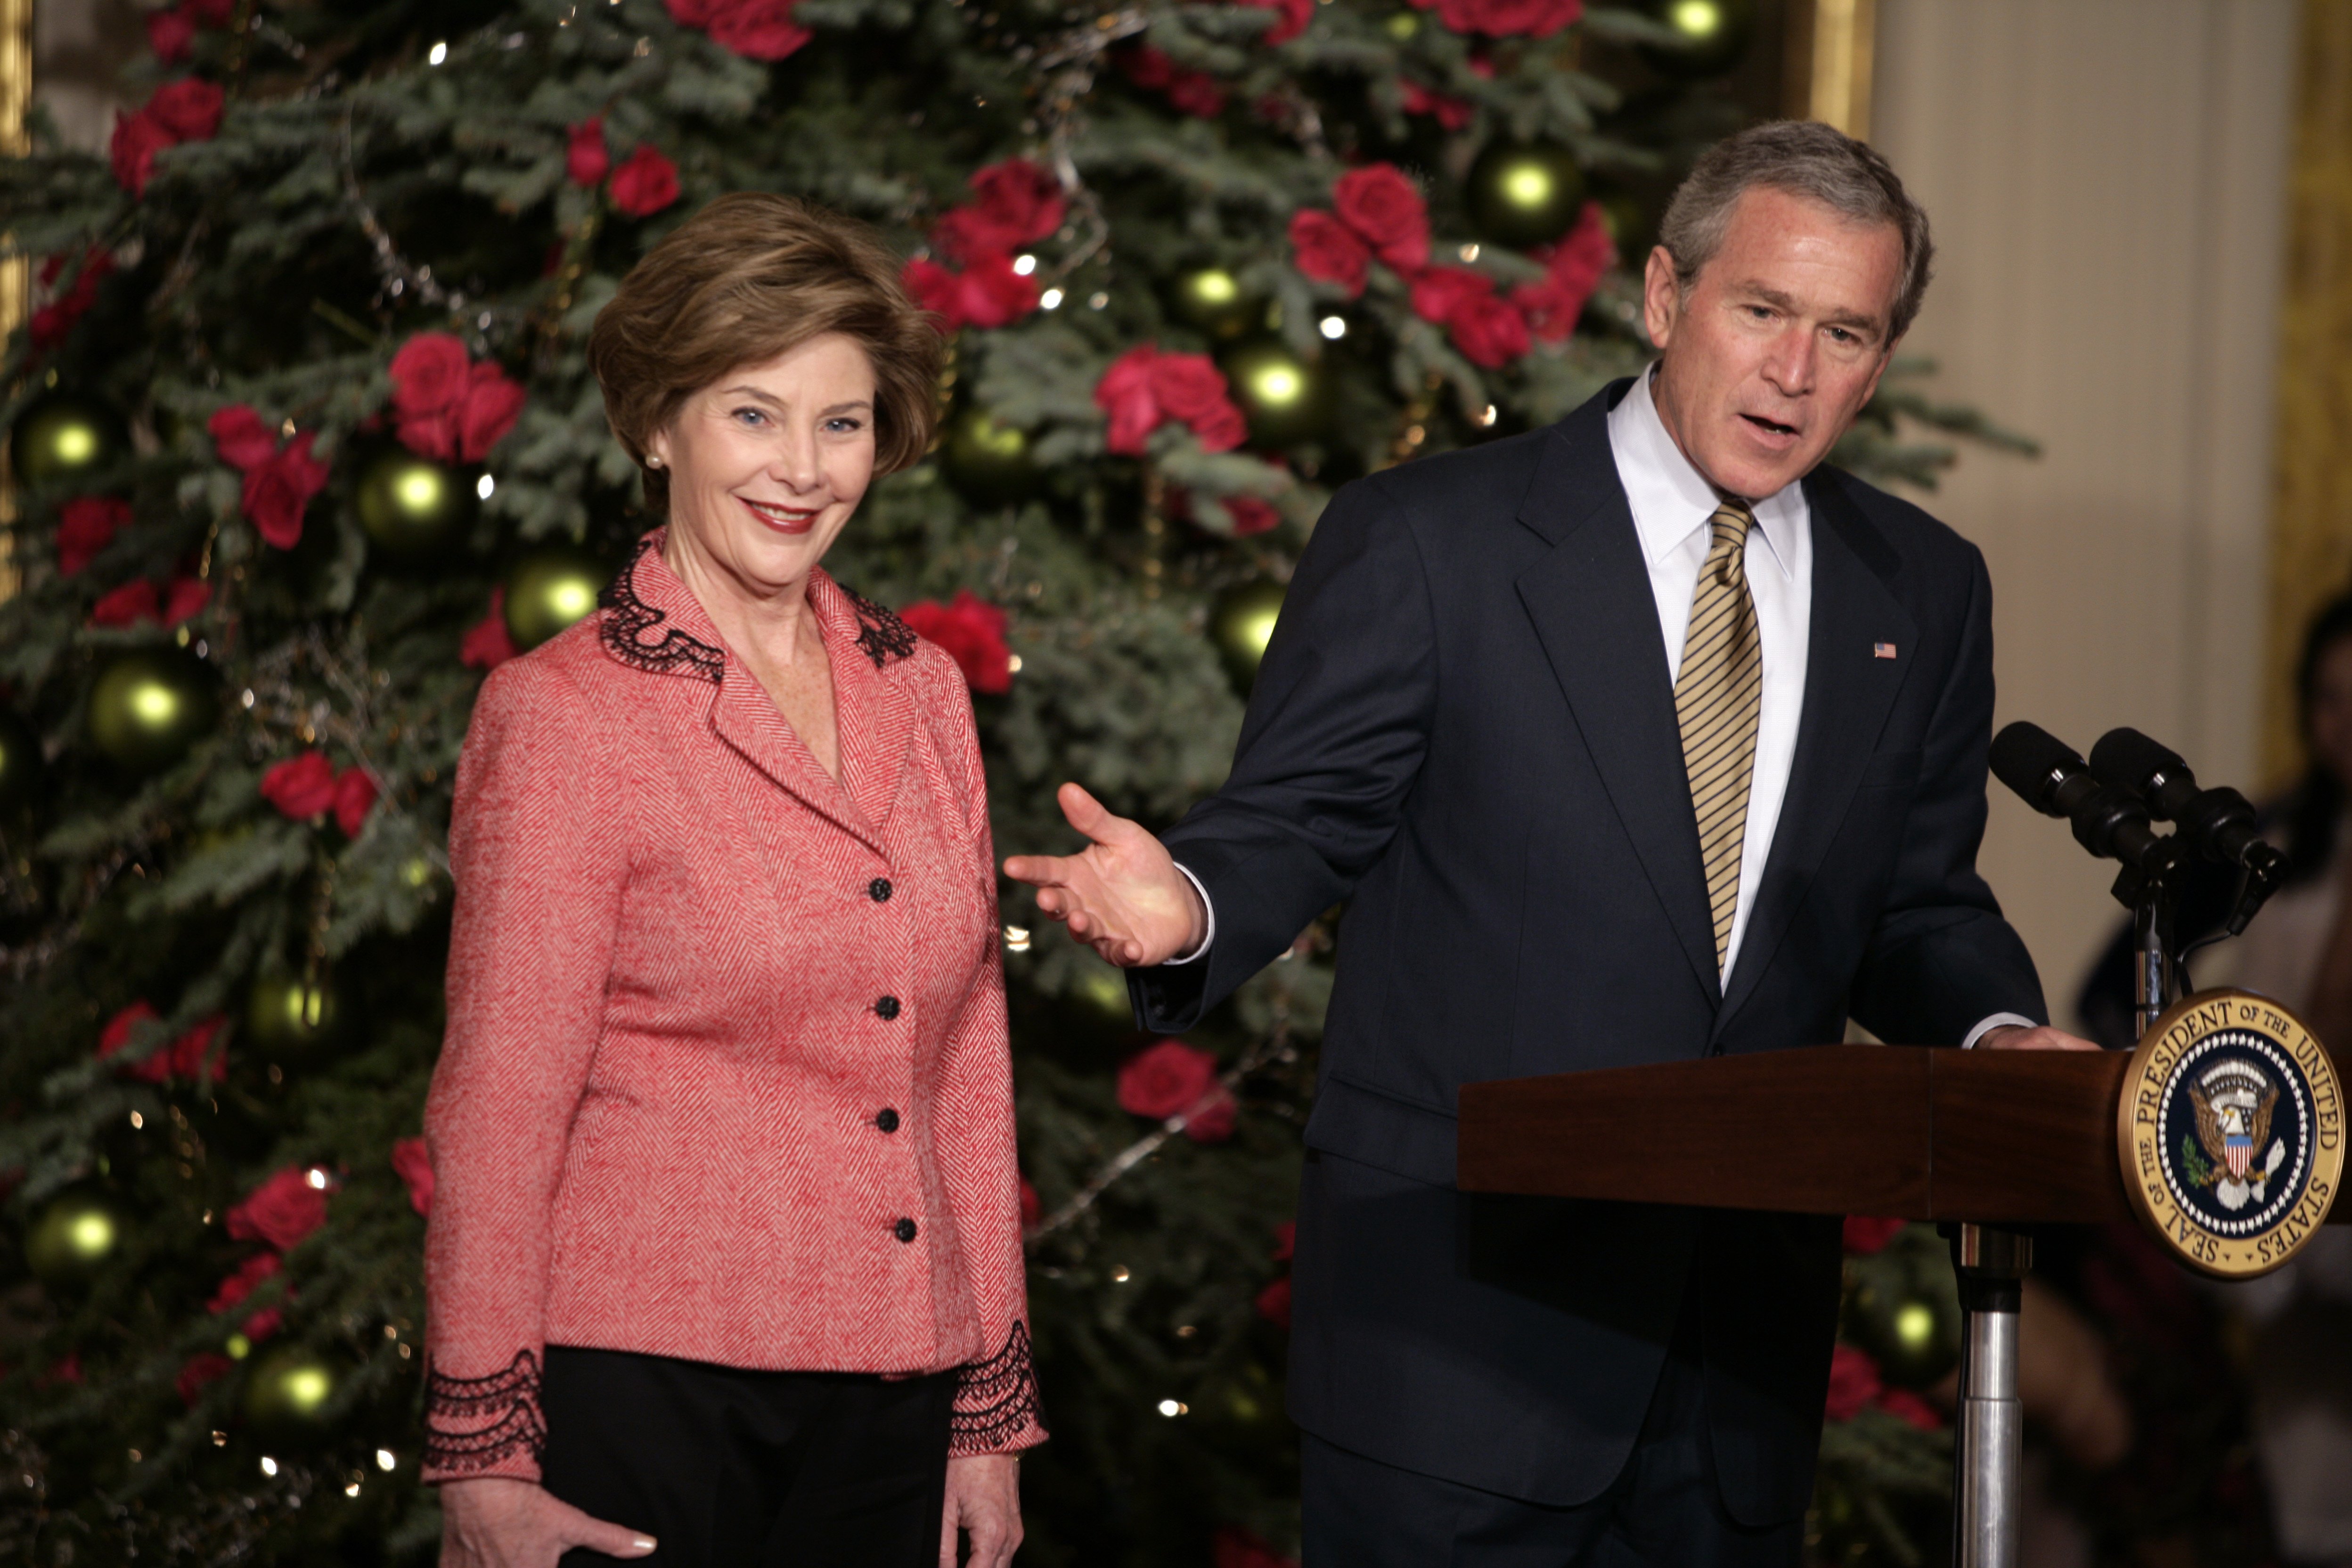 George W. Bush and his wife Laura Bush during their annual children's holiday reception and performance in the East Room of the White House on December 5, 2005. / Source: Getty Imagees